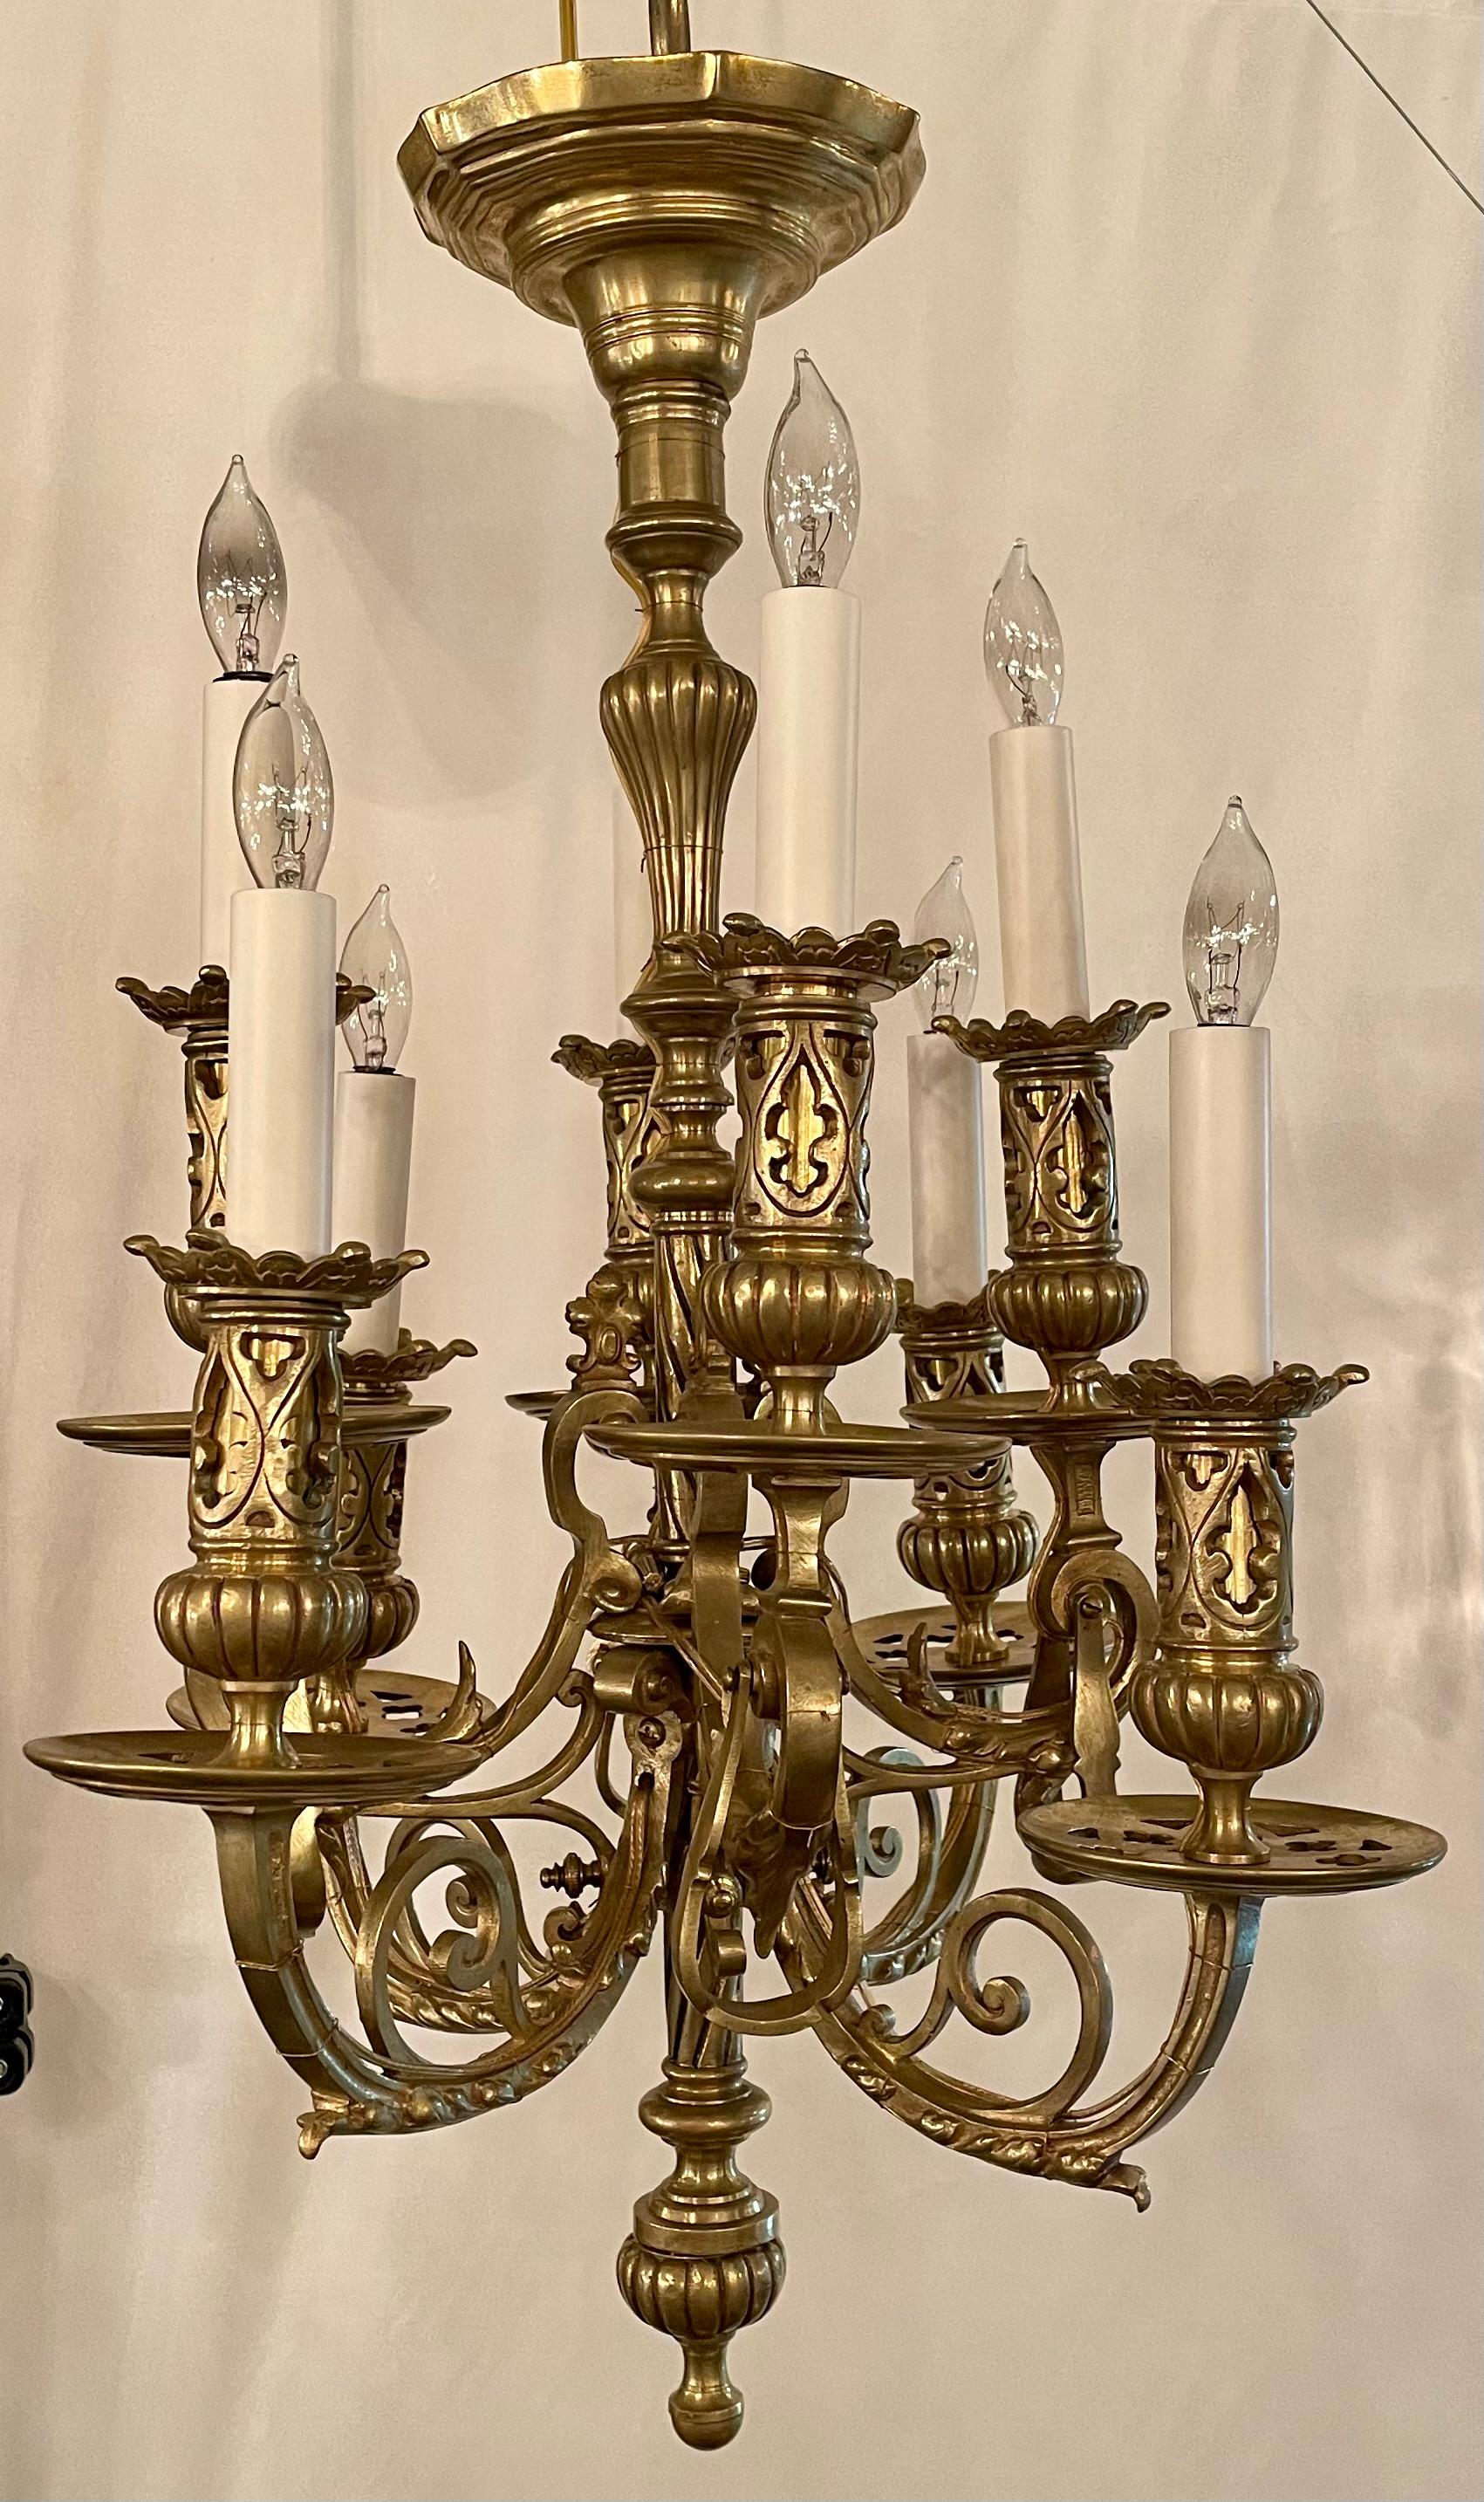 Pair Antique French Louis XIII Style Gold Bronze Chandeliers circa 1860-1870 In Good Condition For Sale In New Orleans, LA